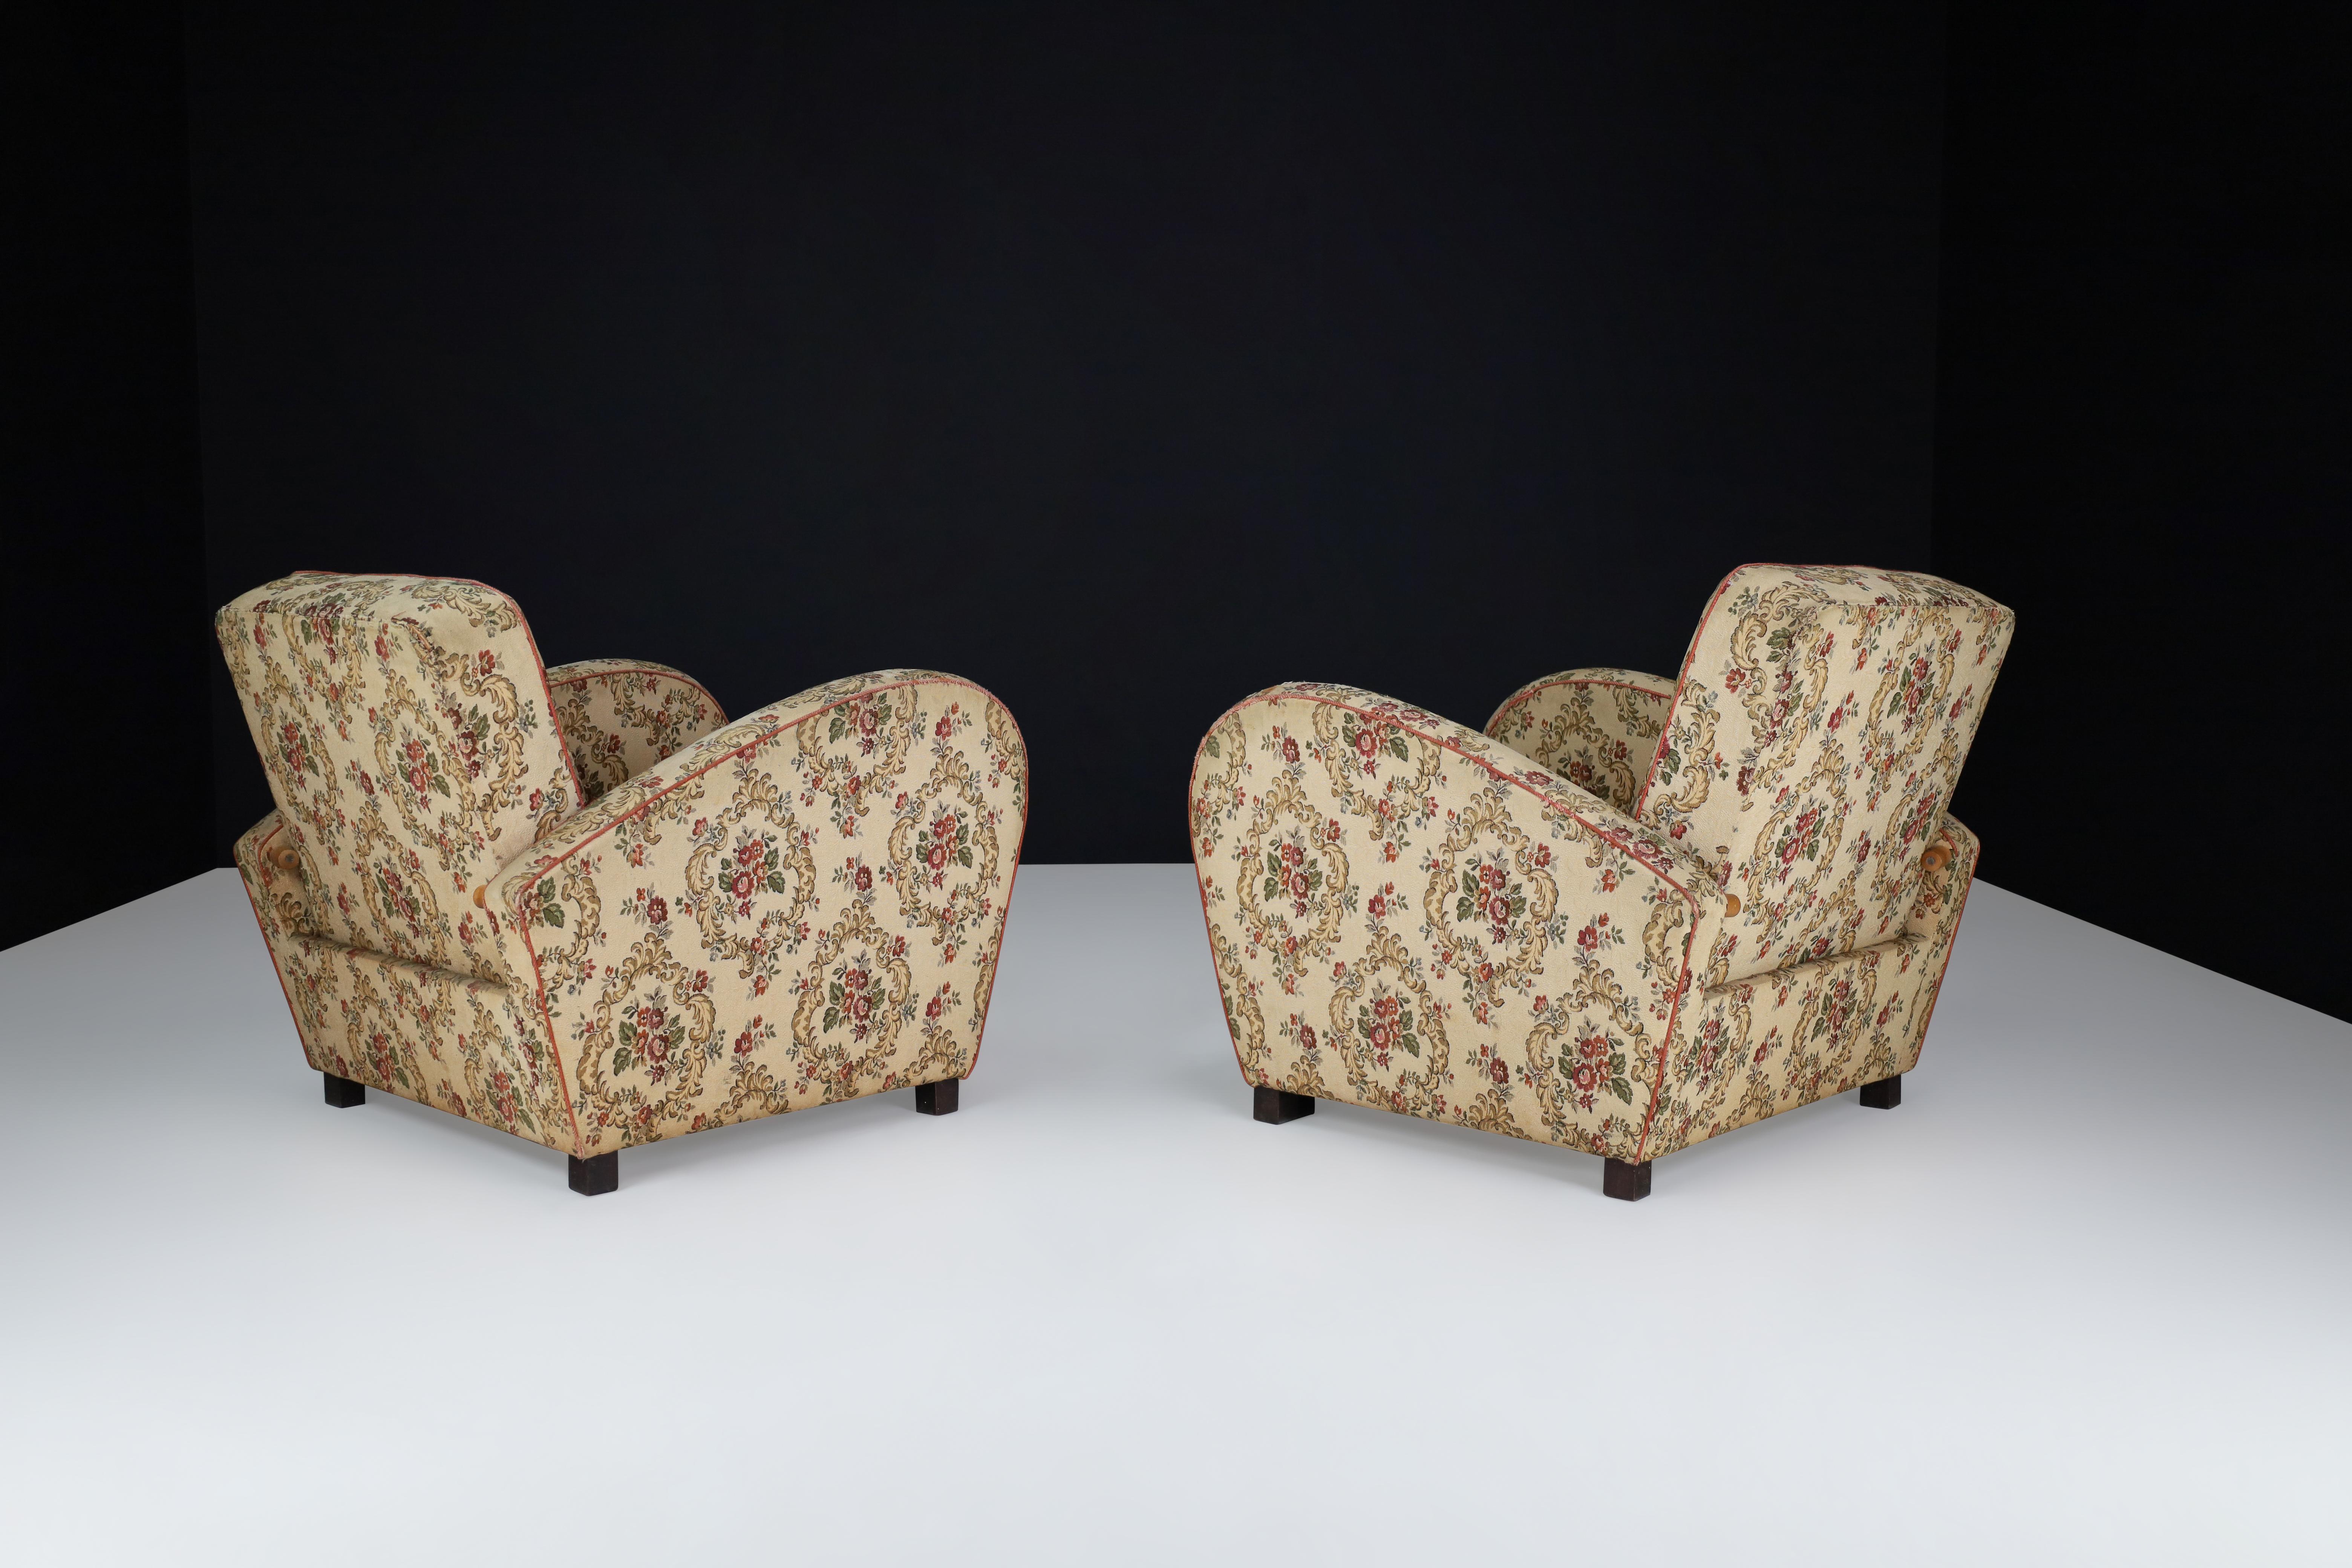 20th Century Jindrich Halabala Art Deco Lounge Chairs in Floral Upholstery For Sale